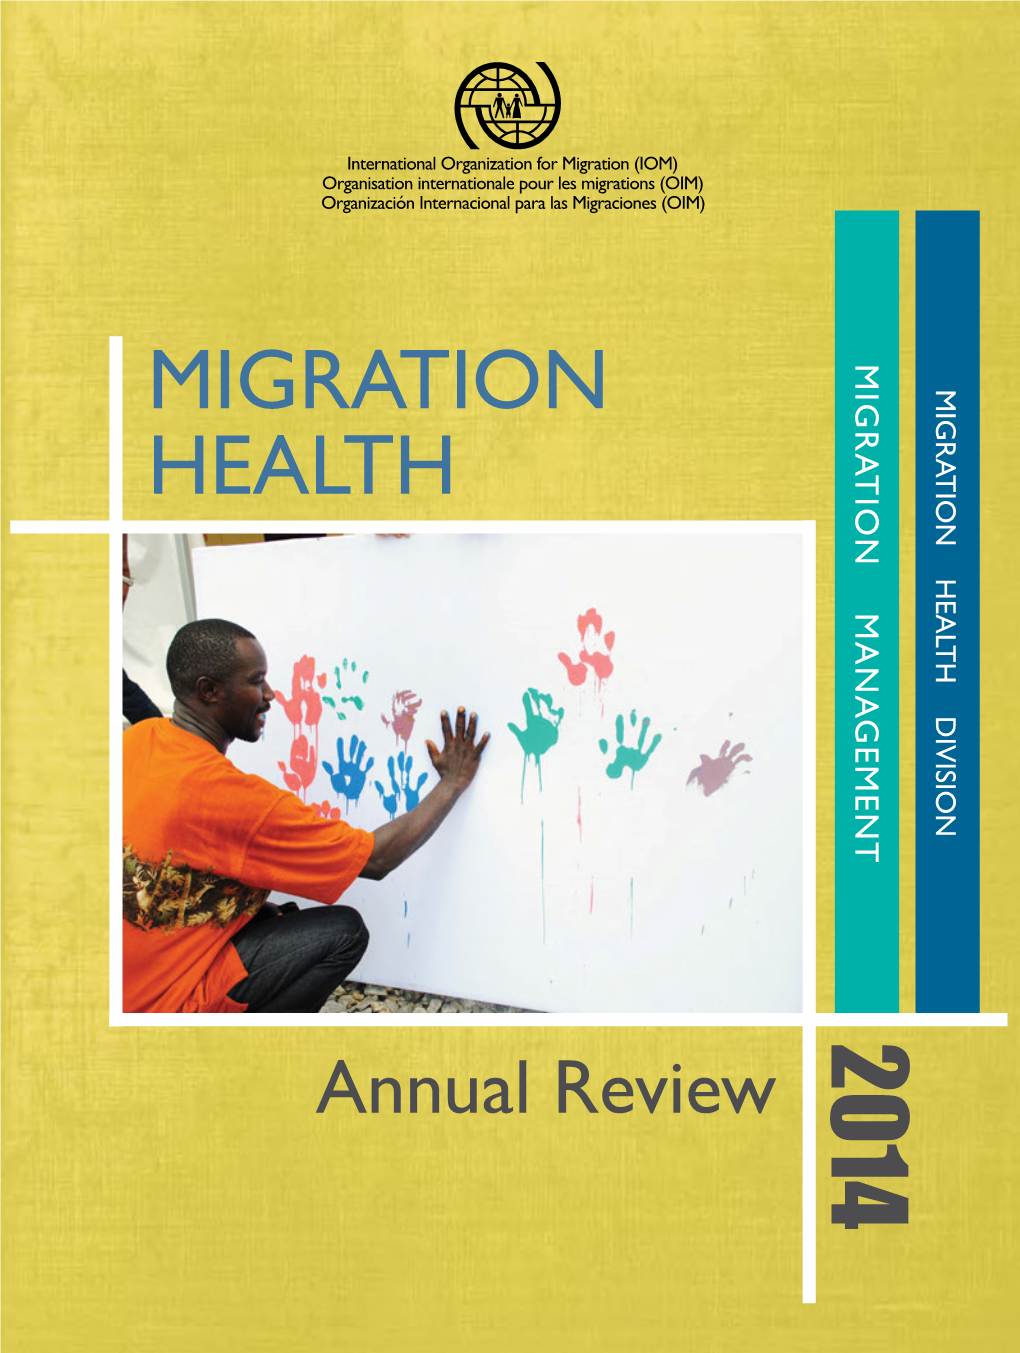 MIGRATION HEALTH DIVISION MIGRATION MANAGEMENT 2014 Annual Review Annual MIGRATION HEALTH